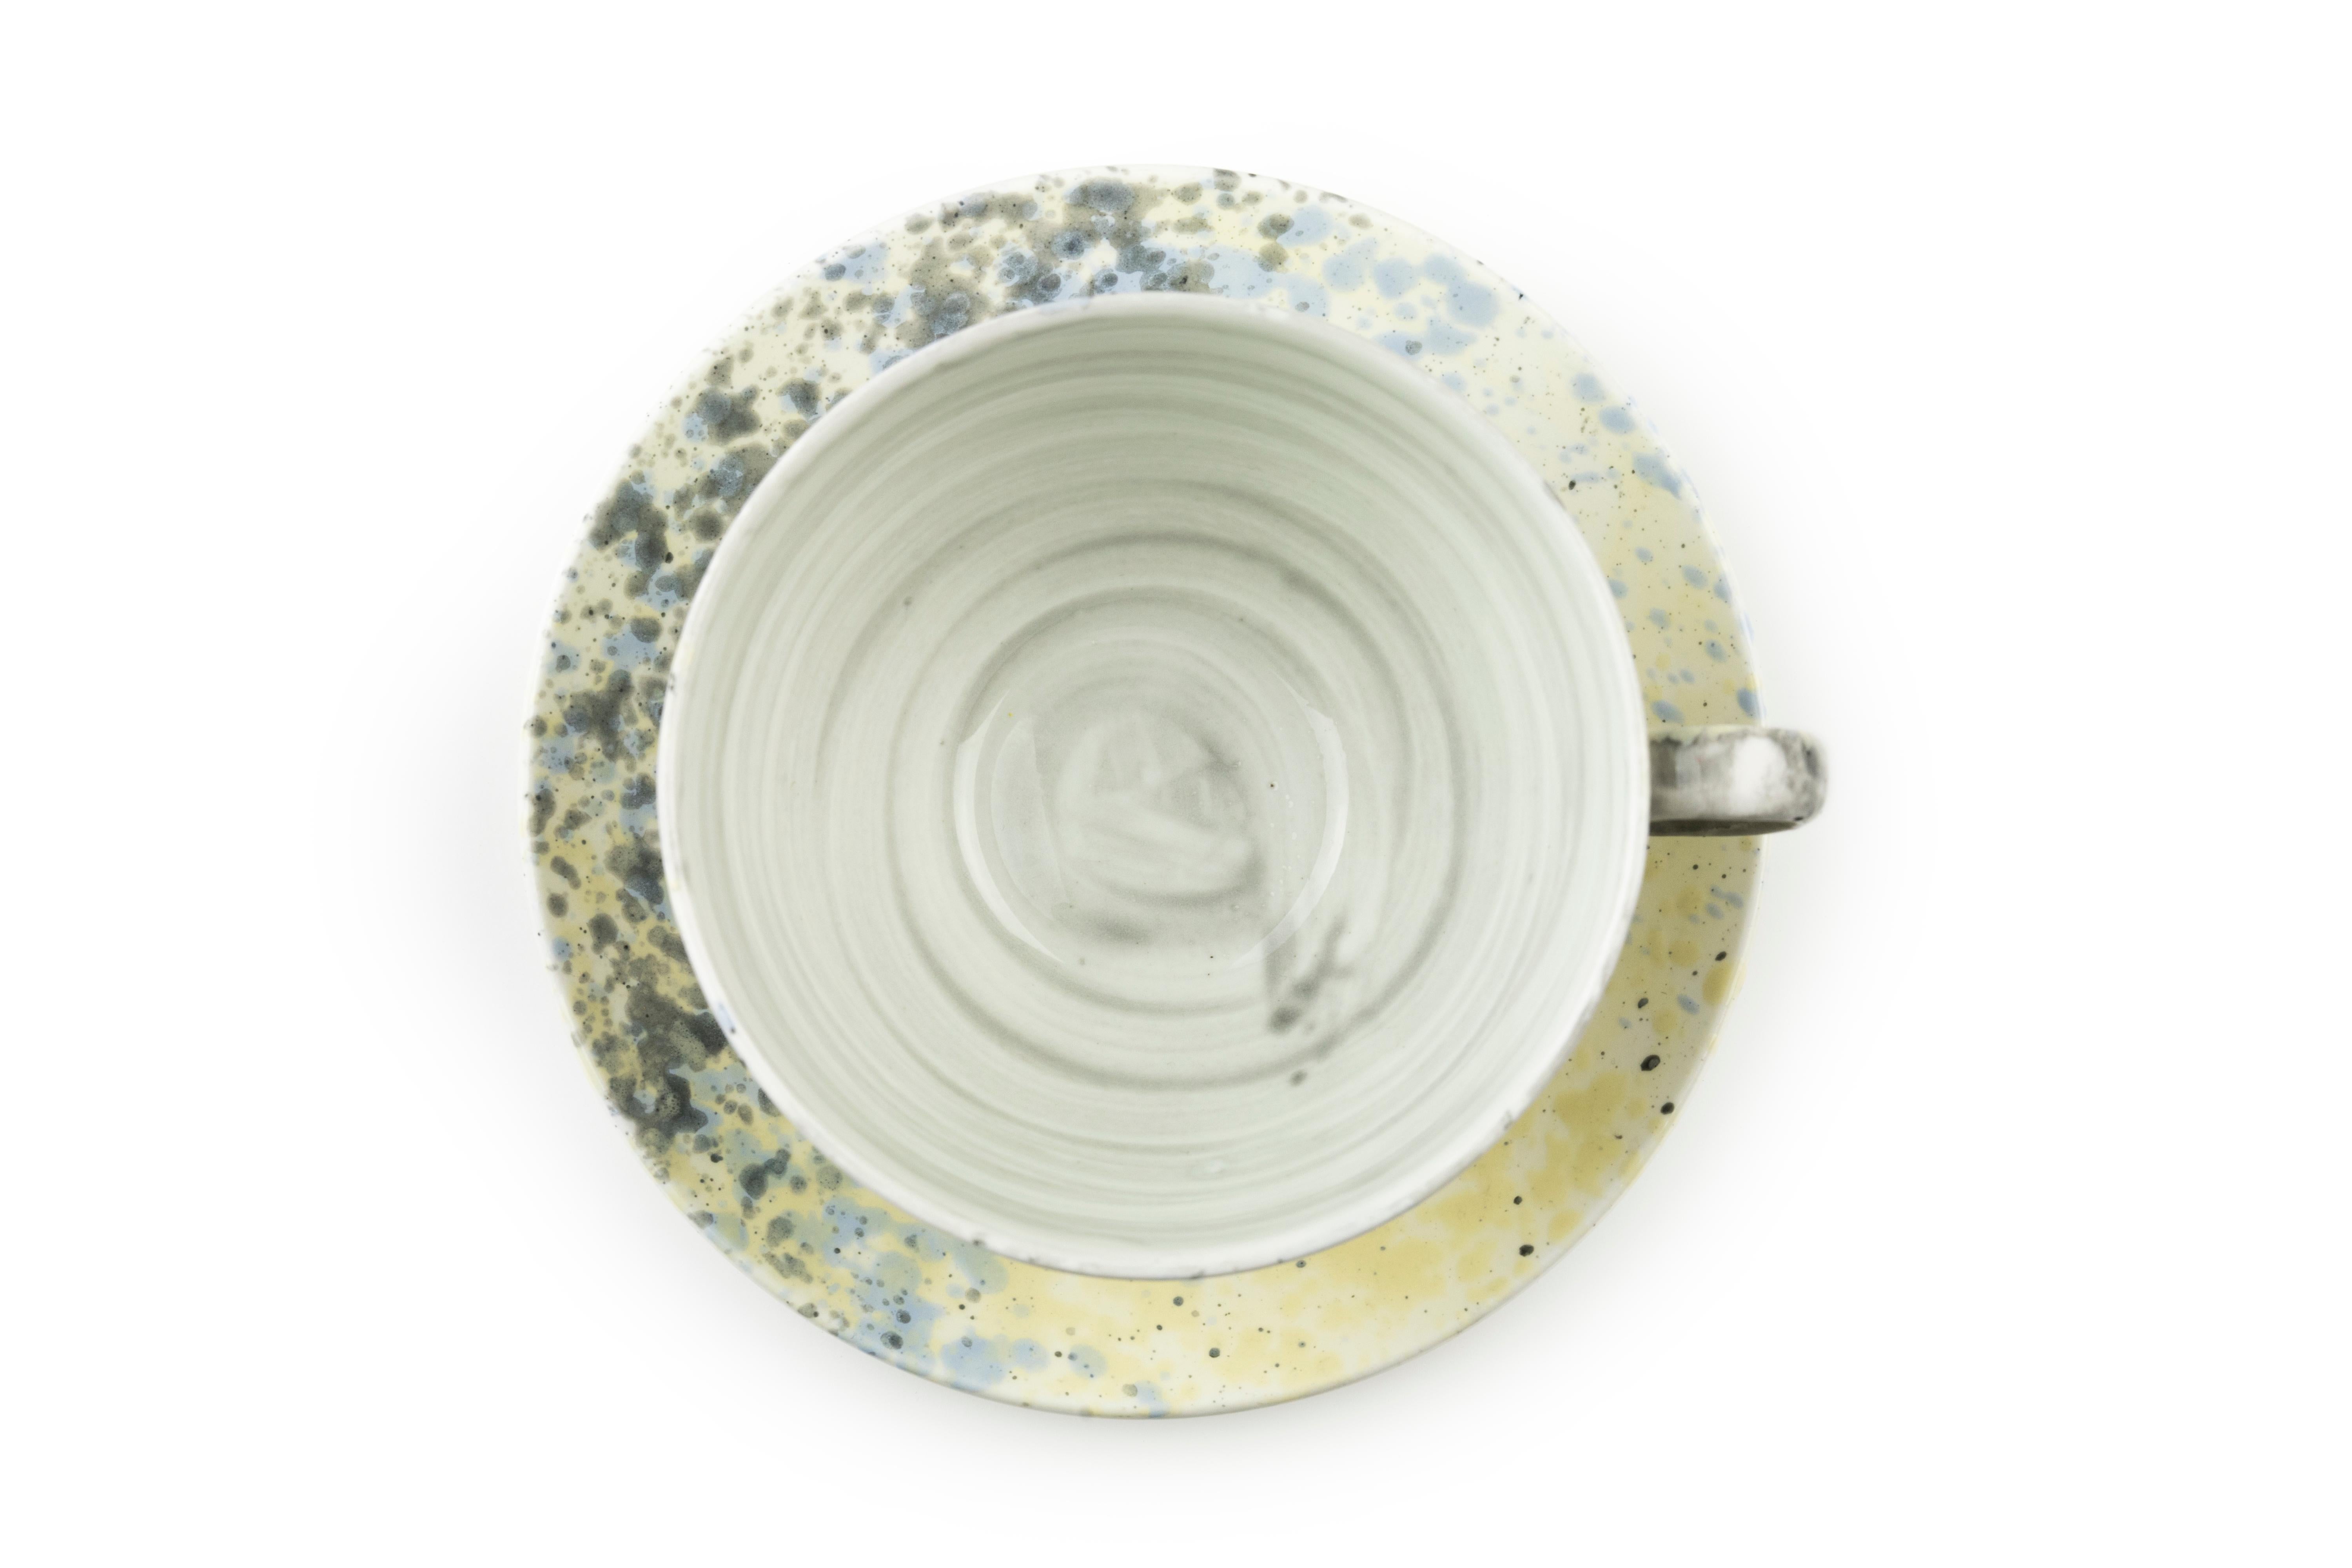 This tea cup and saucer are available in a variety of colors and finishes to be mixed and matched. When purchasing this set please specify the color and finish for each item.

Color options:
Solid grey
Solid blue
Grey splatter
Yellow